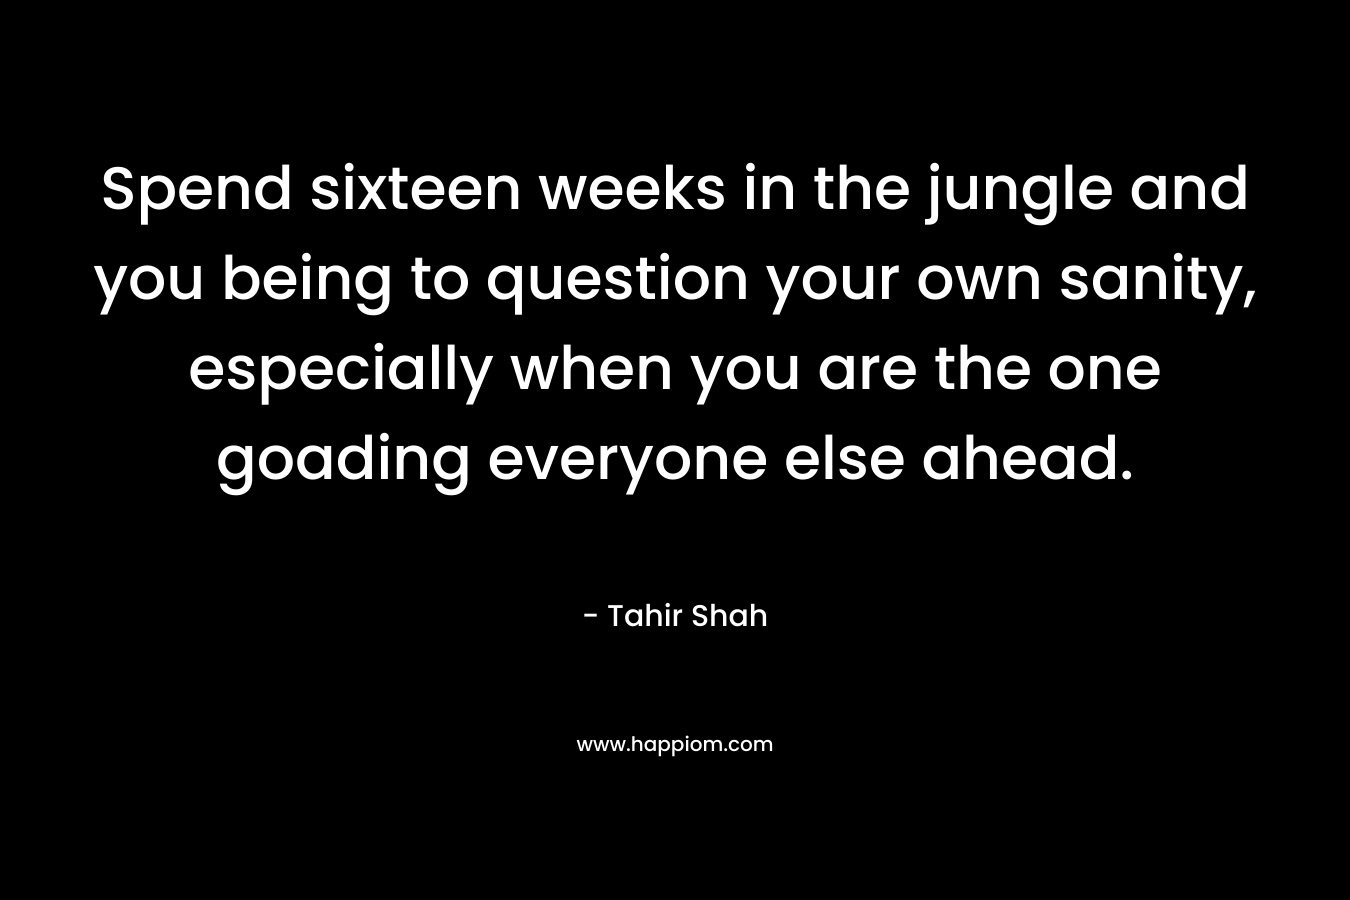 Spend sixteen weeks in the jungle and you being to question your own sanity, especially when you are the one goading everyone else ahead. – Tahir Shah